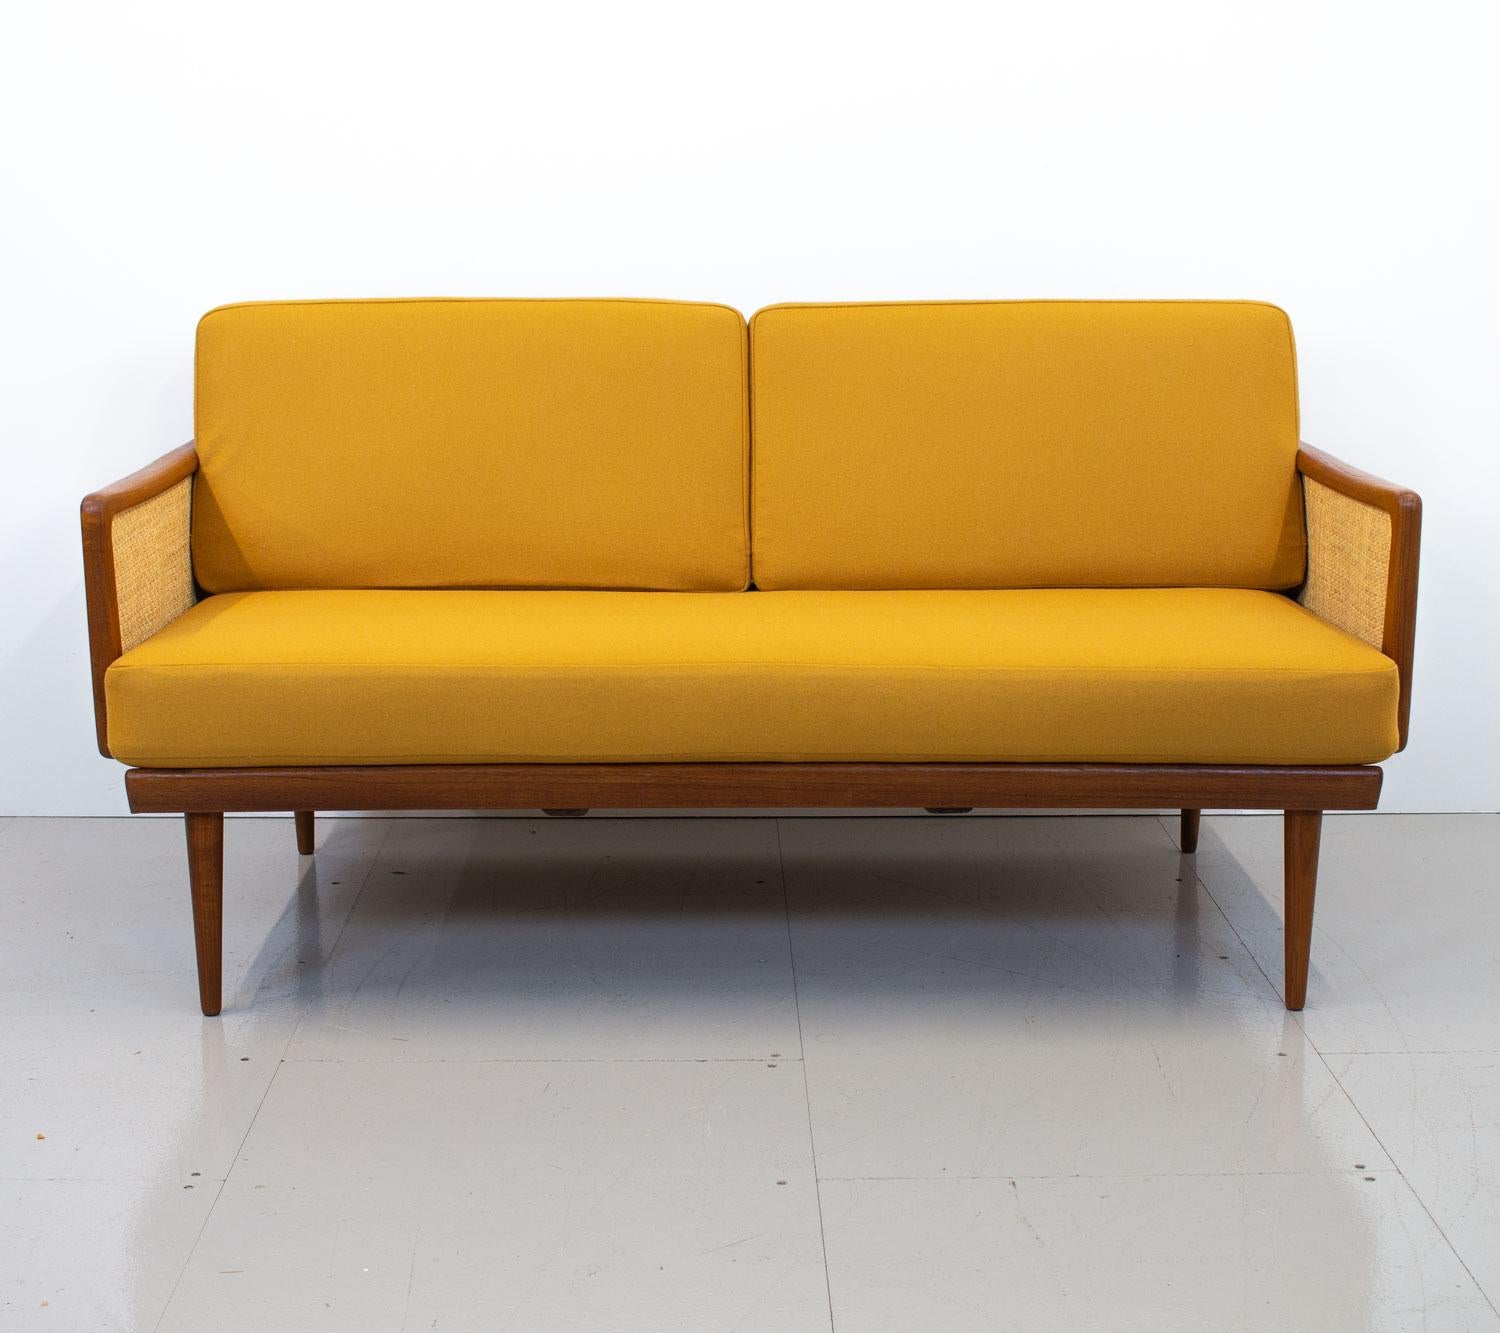 A beautiful example of a France & Sons FD453 sofa/daybed designed by Peter Hvidt and Orla Mølgaard Nielsen in the late 1950s. On this particular model both armrests drop down transforming it into a daybed and these can also be used as occasional